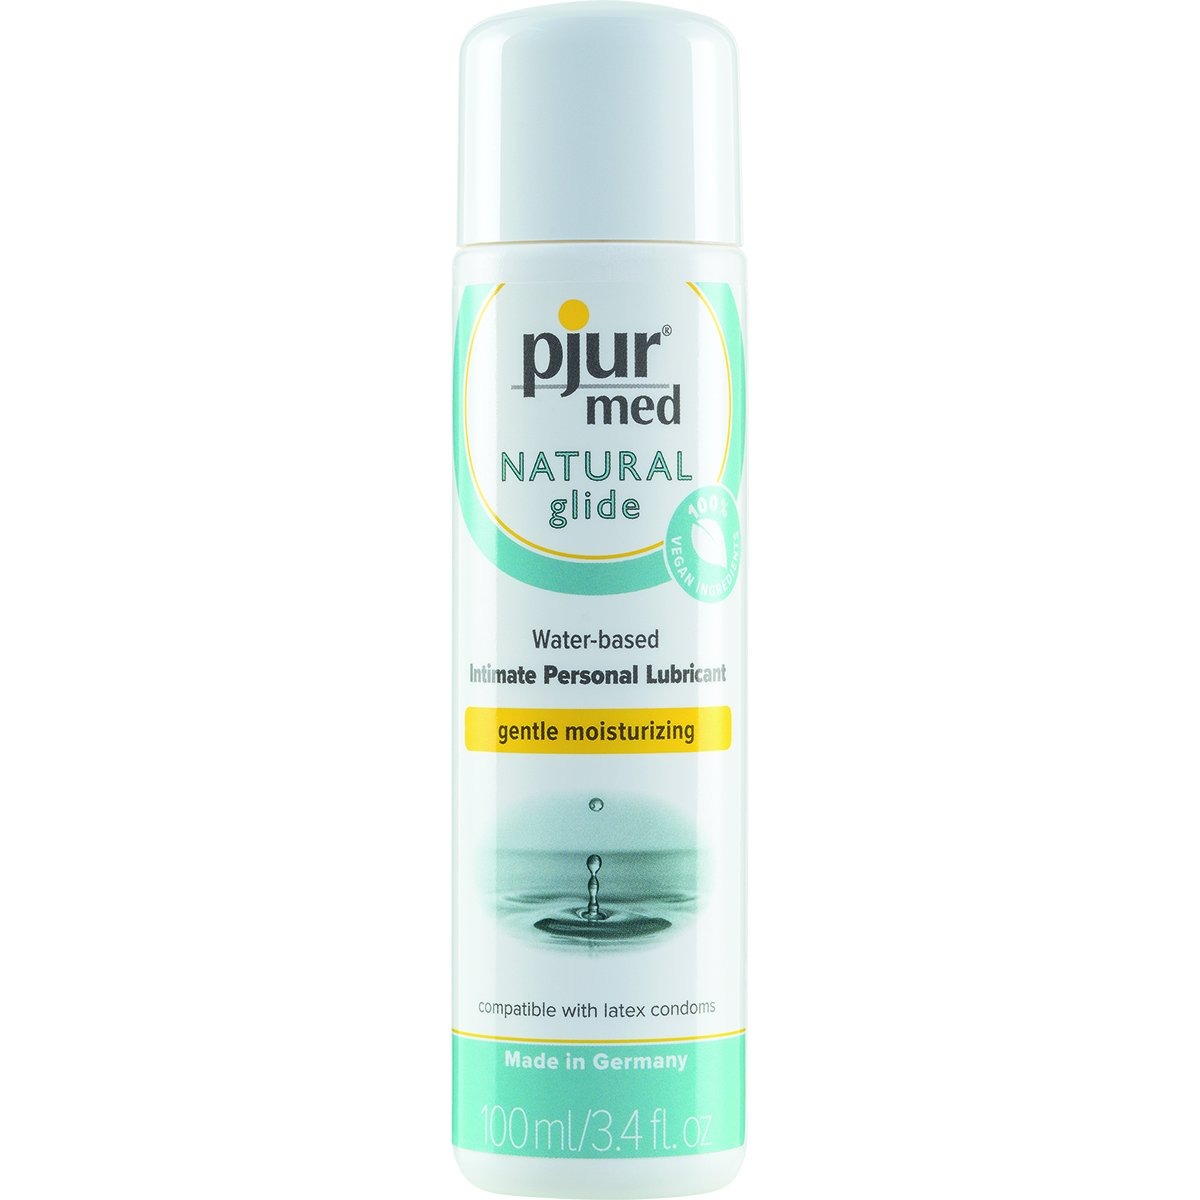 Pjur Med Natural 100ML - Buy At Luxury Toy X - Free 3-Day Shipping